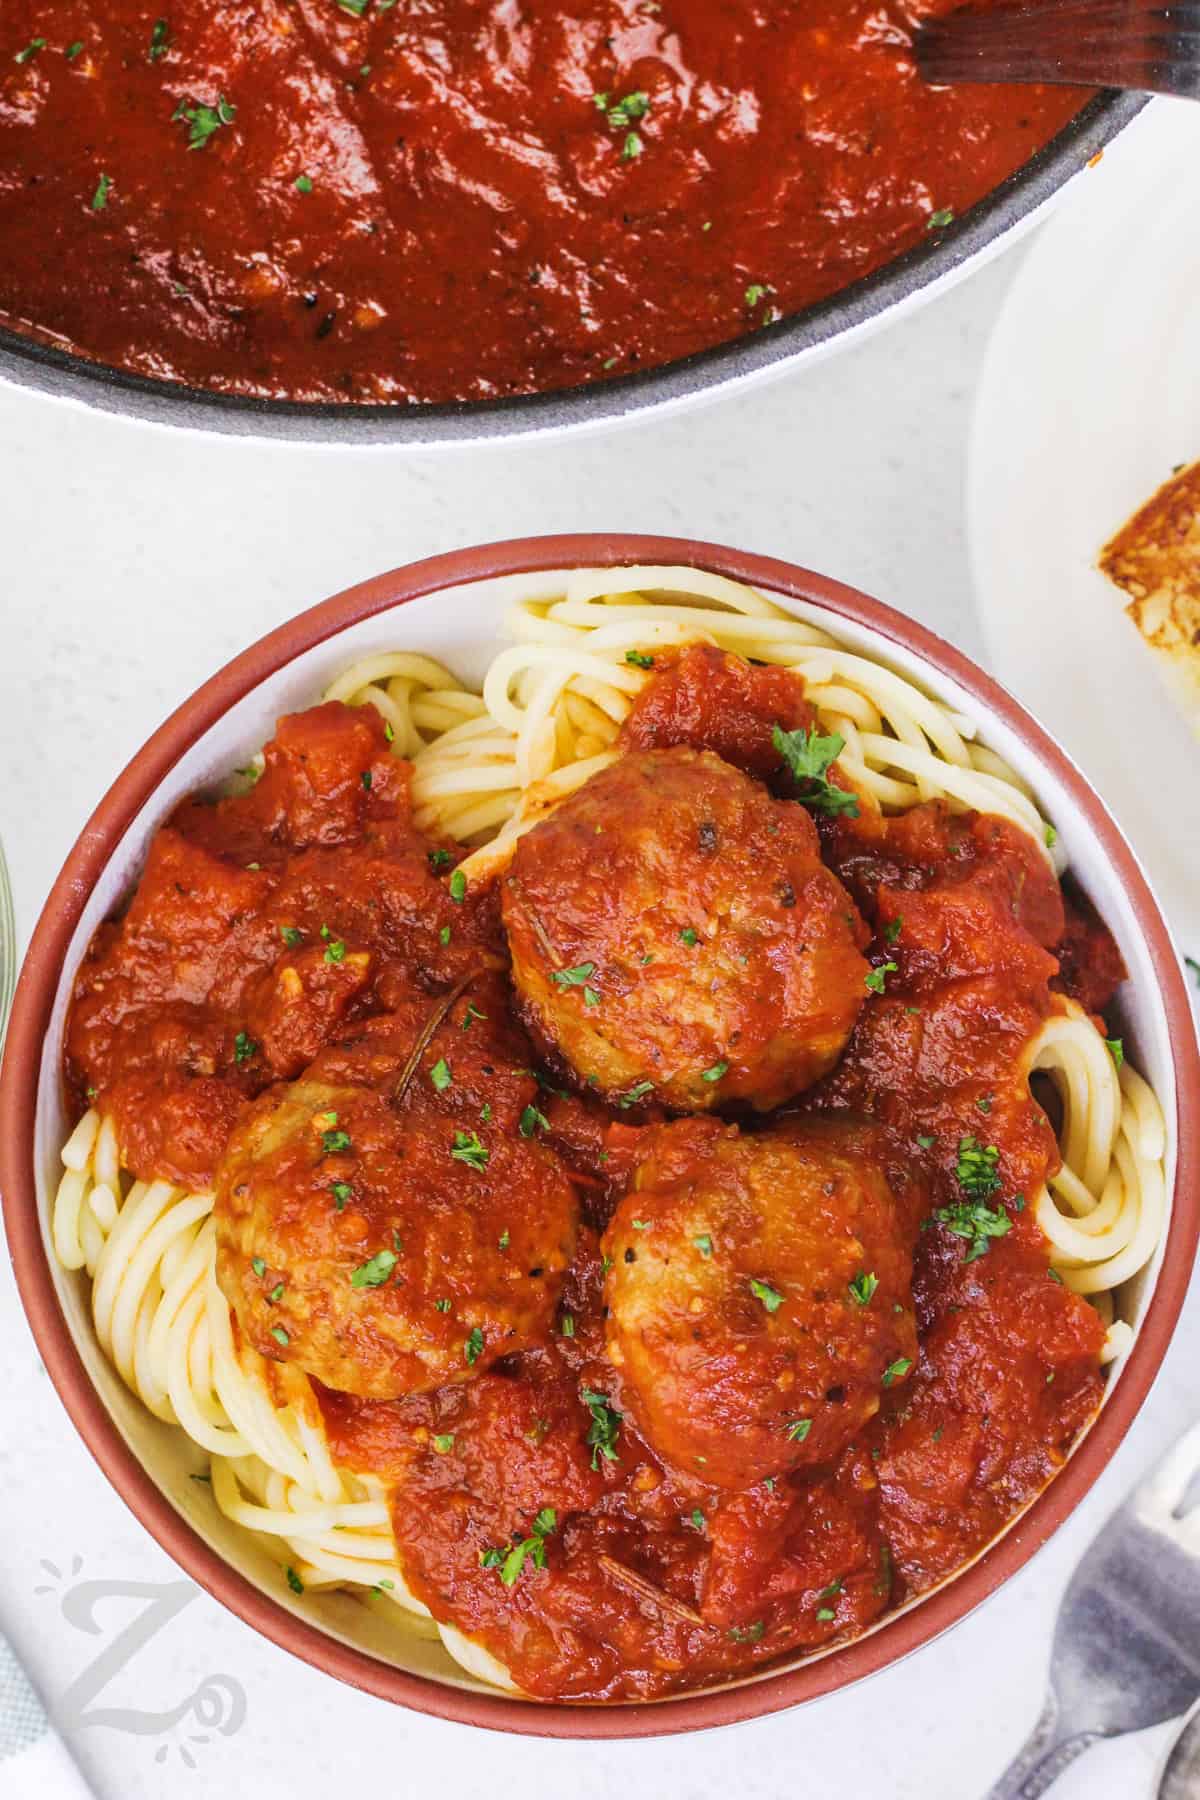 meatballs and sauce served over spaghetti in a bowl